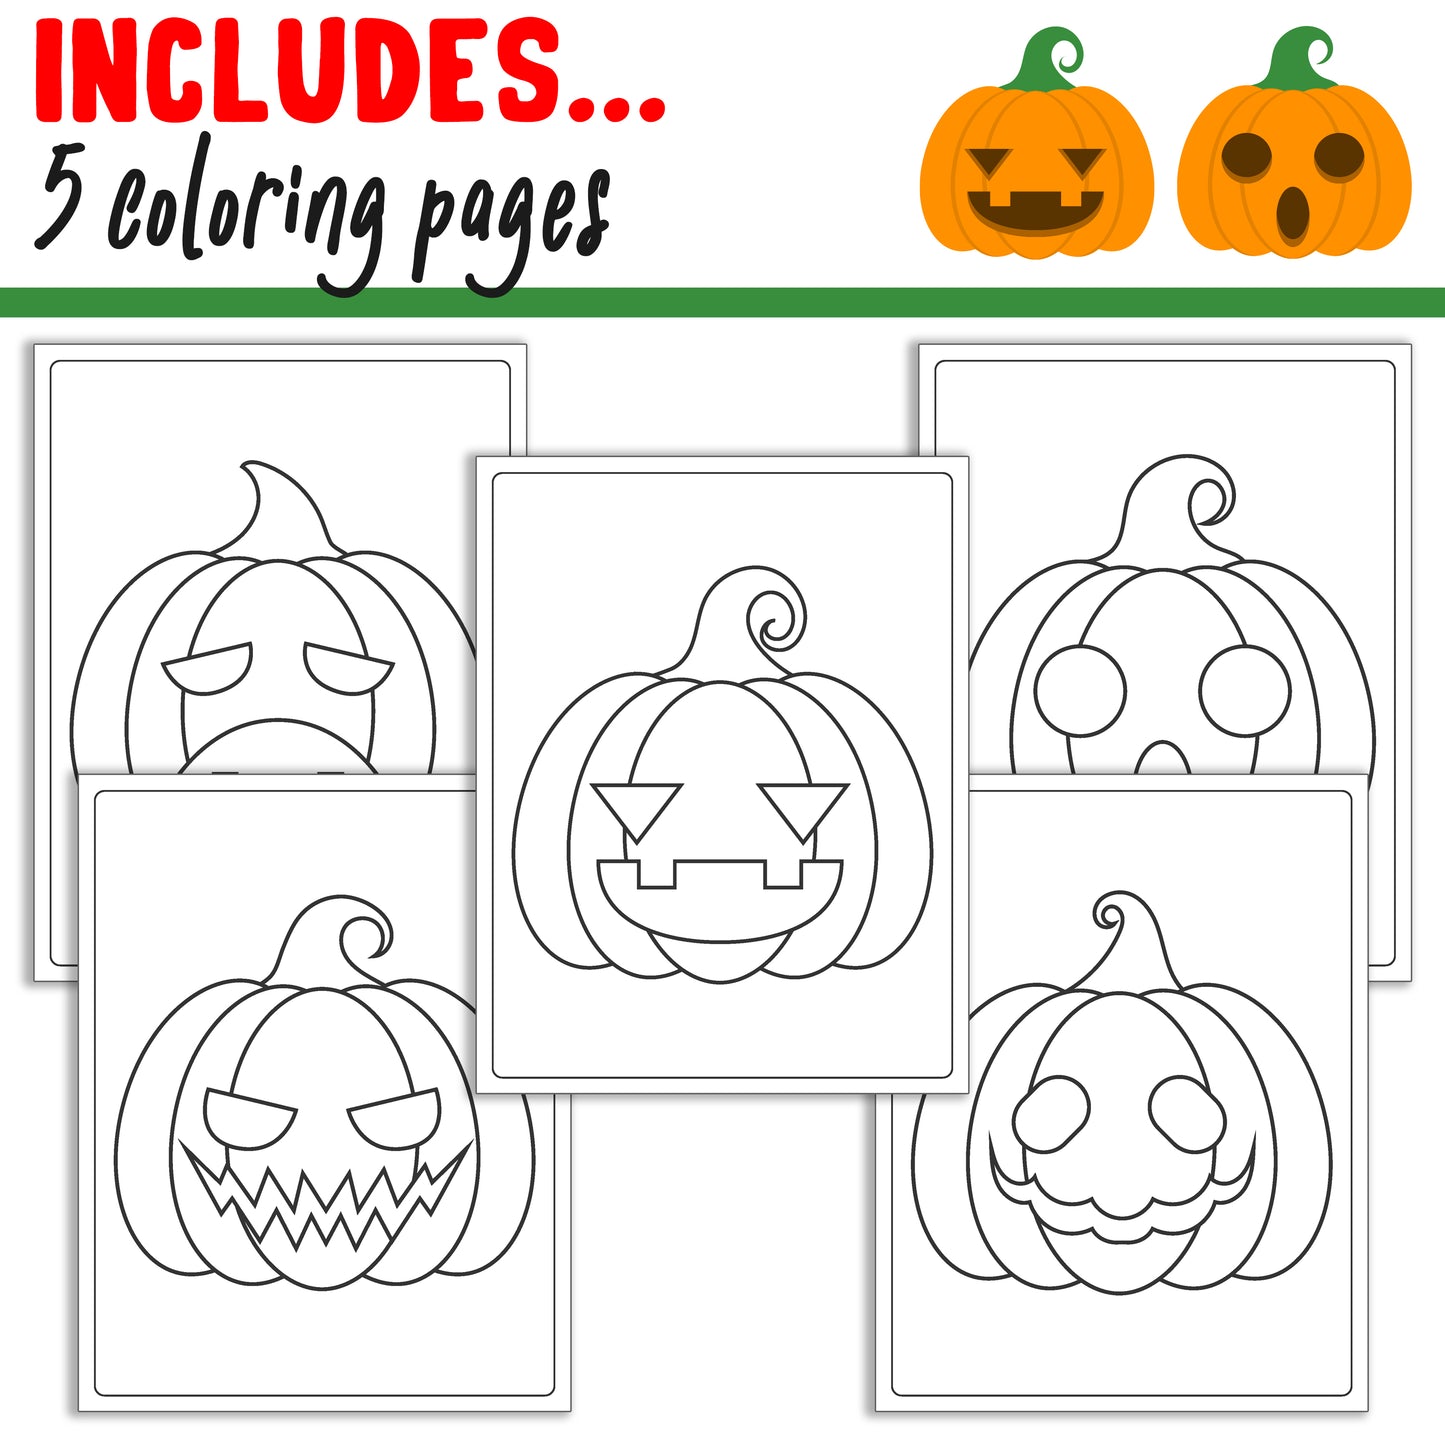 How To Draw a Halloween Pumpkin, Directed Drawing Step by Step Tutorial, Includes 5 Coloring Pages, PDF File, Instant Download